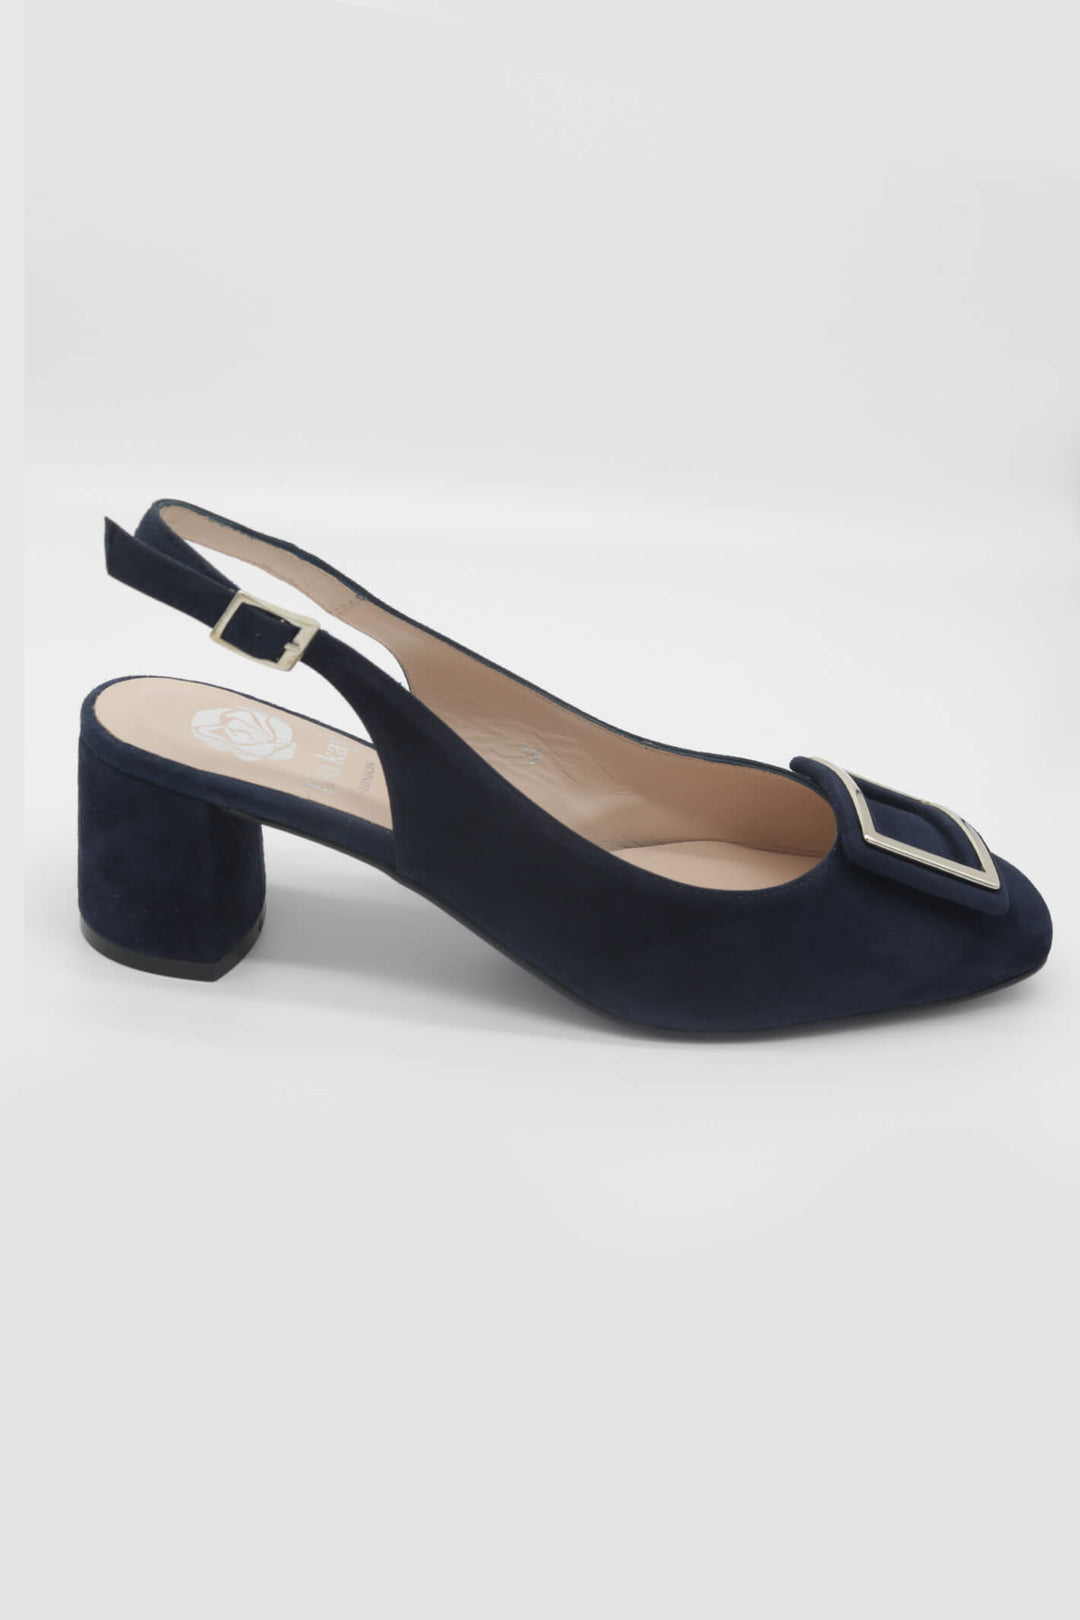 Lisa Kay Rayne Navy Suede Sling Back Shoes - Experience Boutique